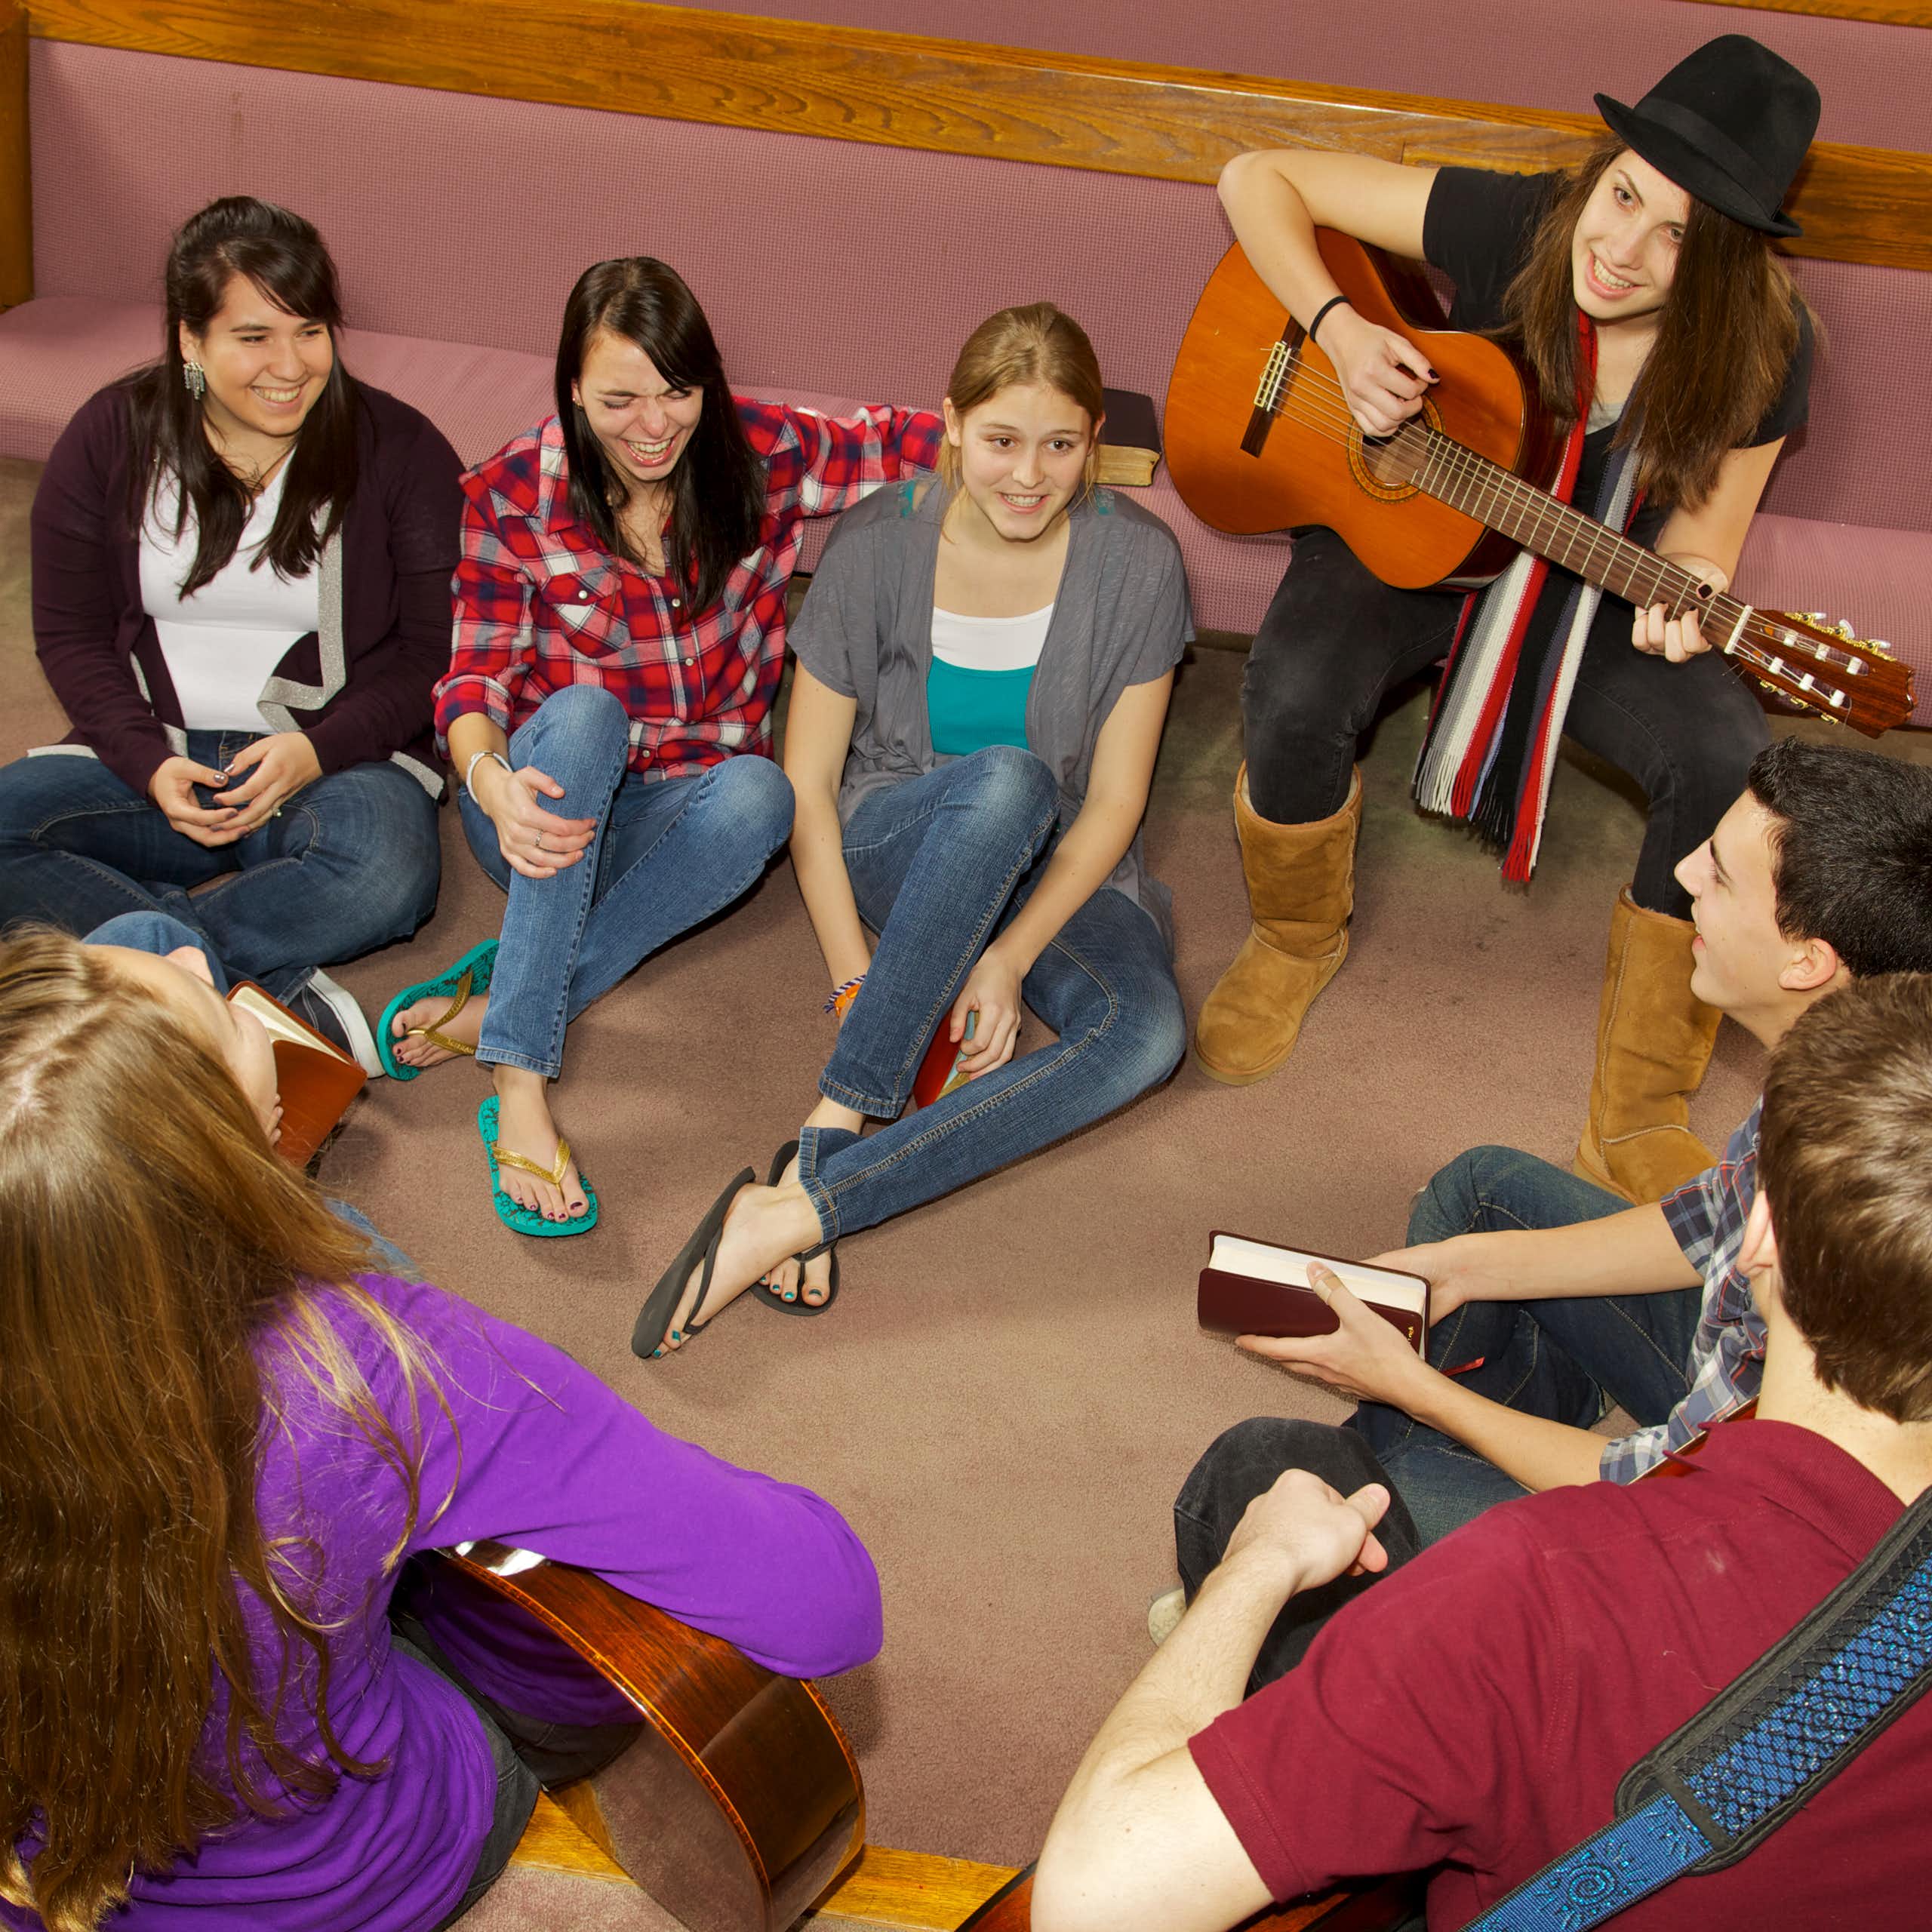 A group of young people sitting on the floor near church pews.